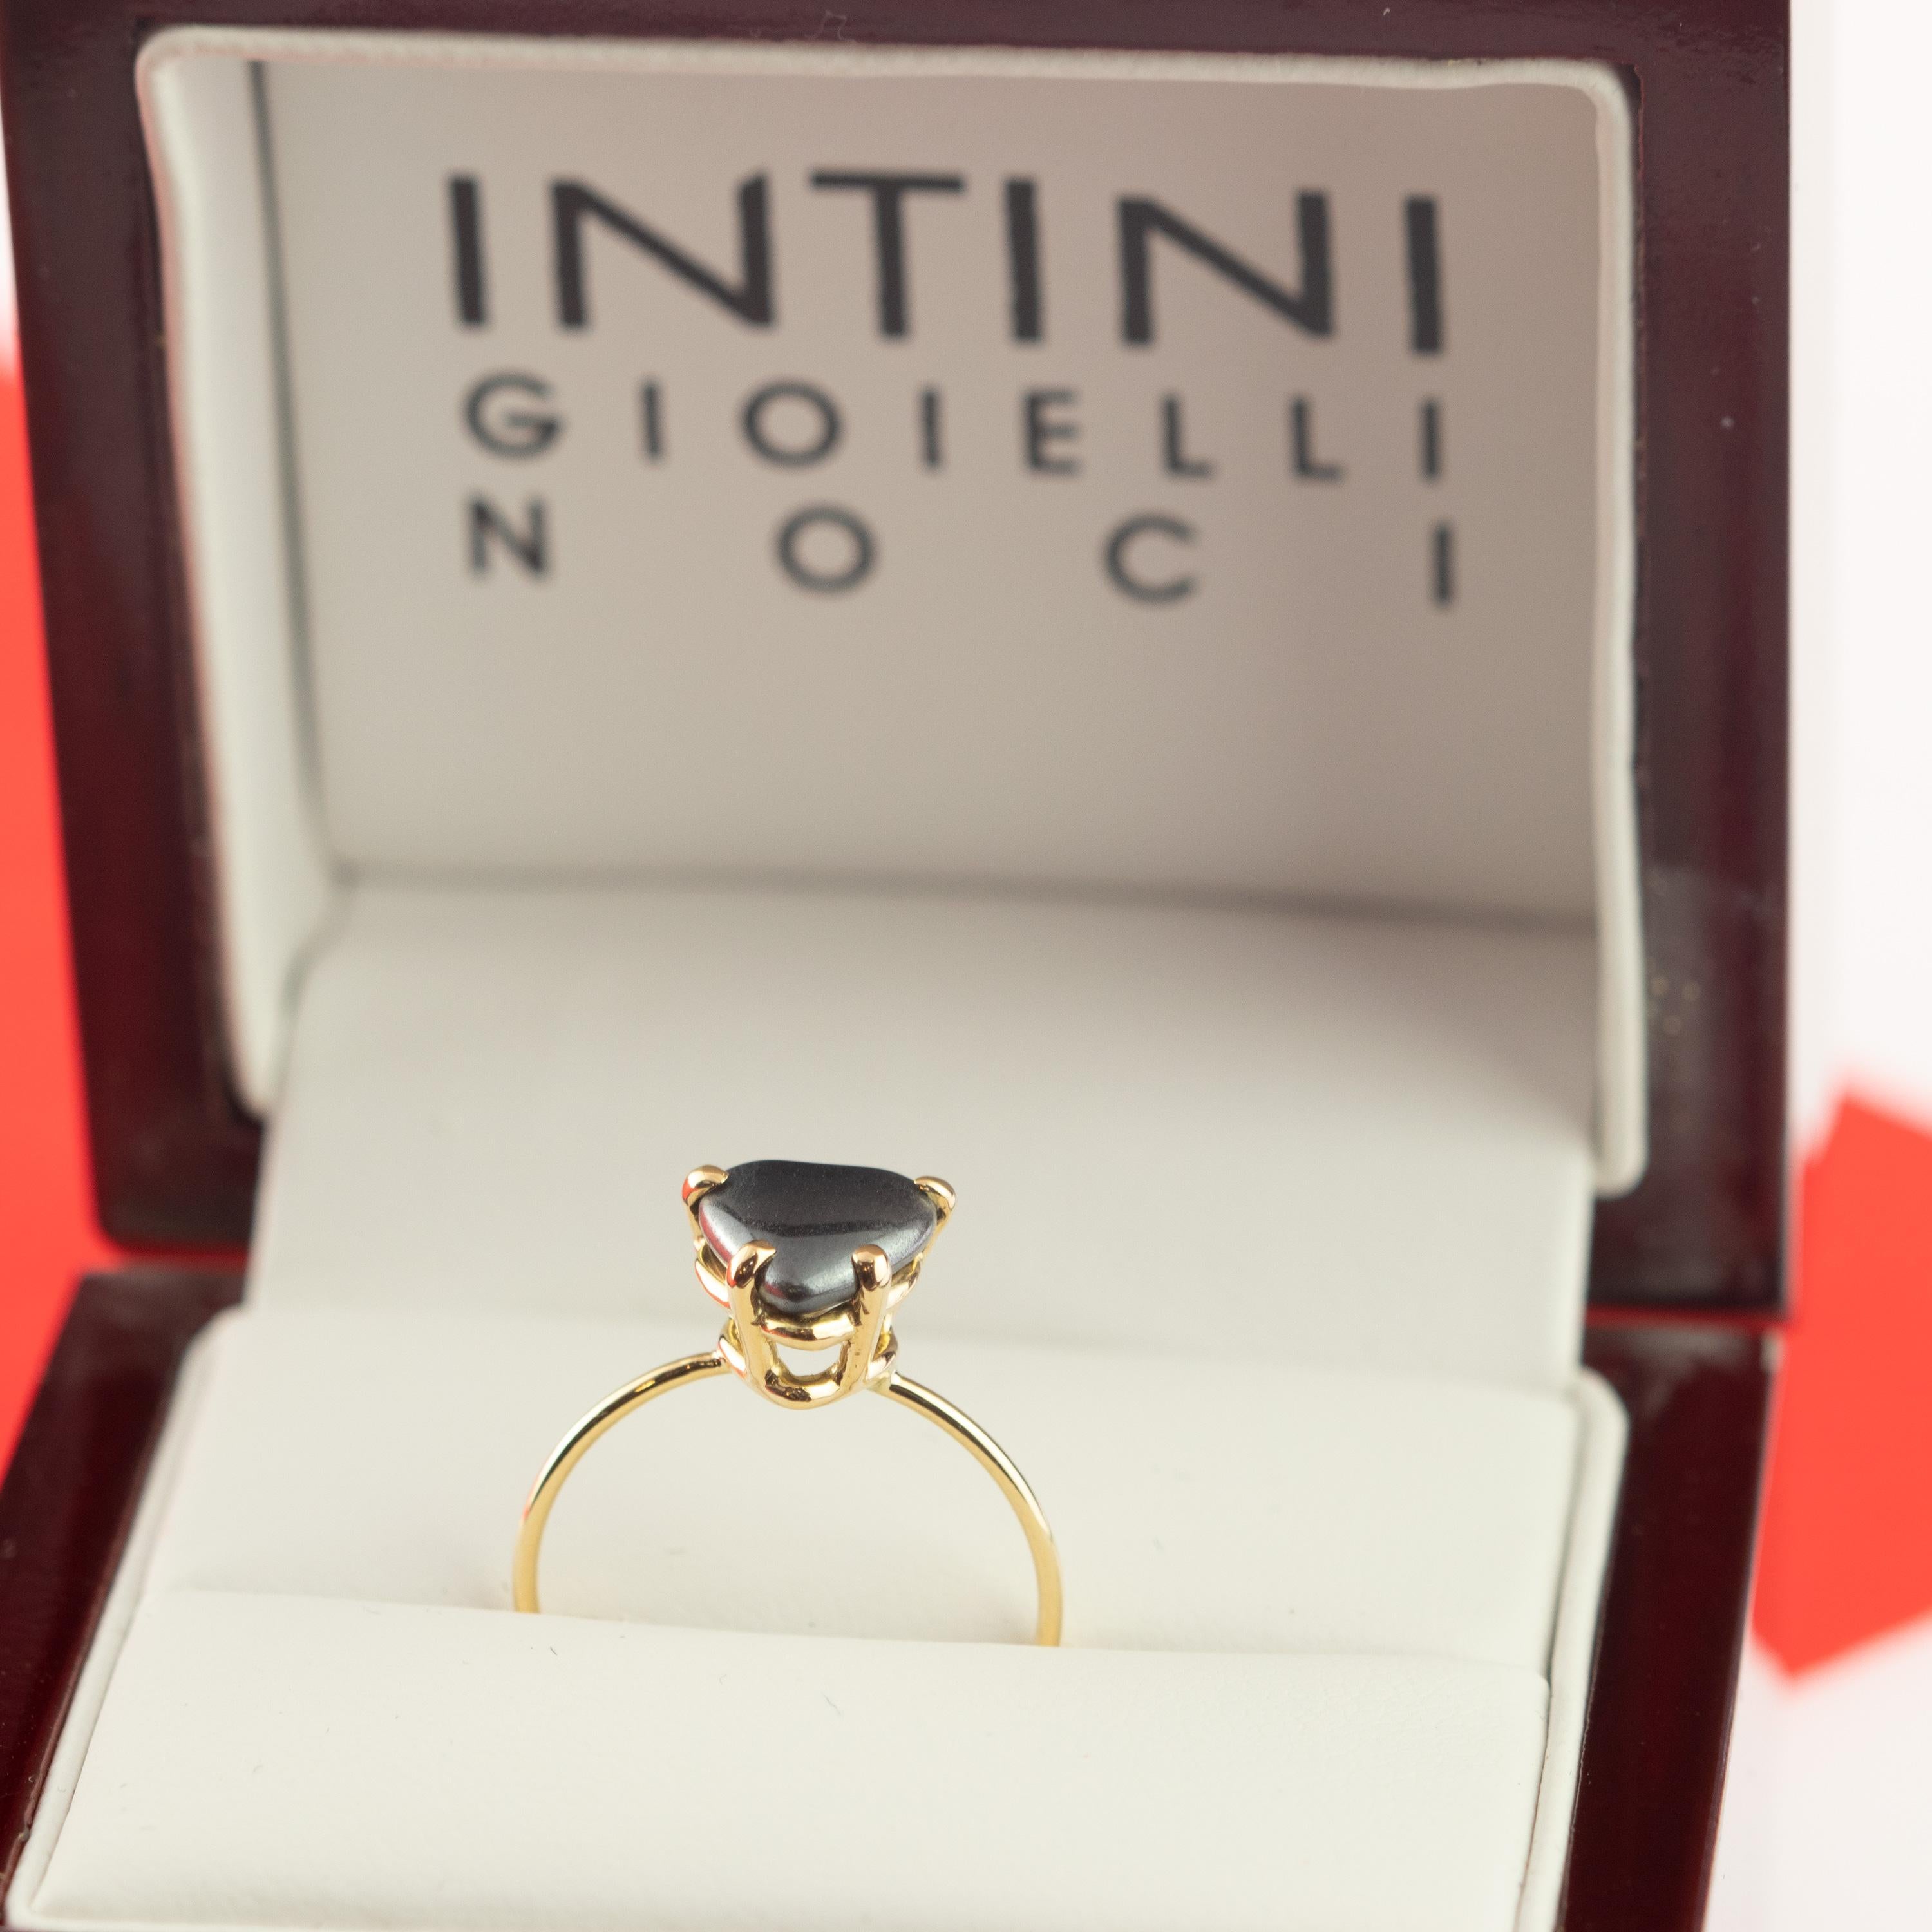 Marvelous handmade 18 karat yellow gold band thin ring embellished with a wonderful heart shaped hematite. Open your intuition and enhance your senses to love. 

Inspired by a strong feeling of love. The beating heart is used as an intensive form of